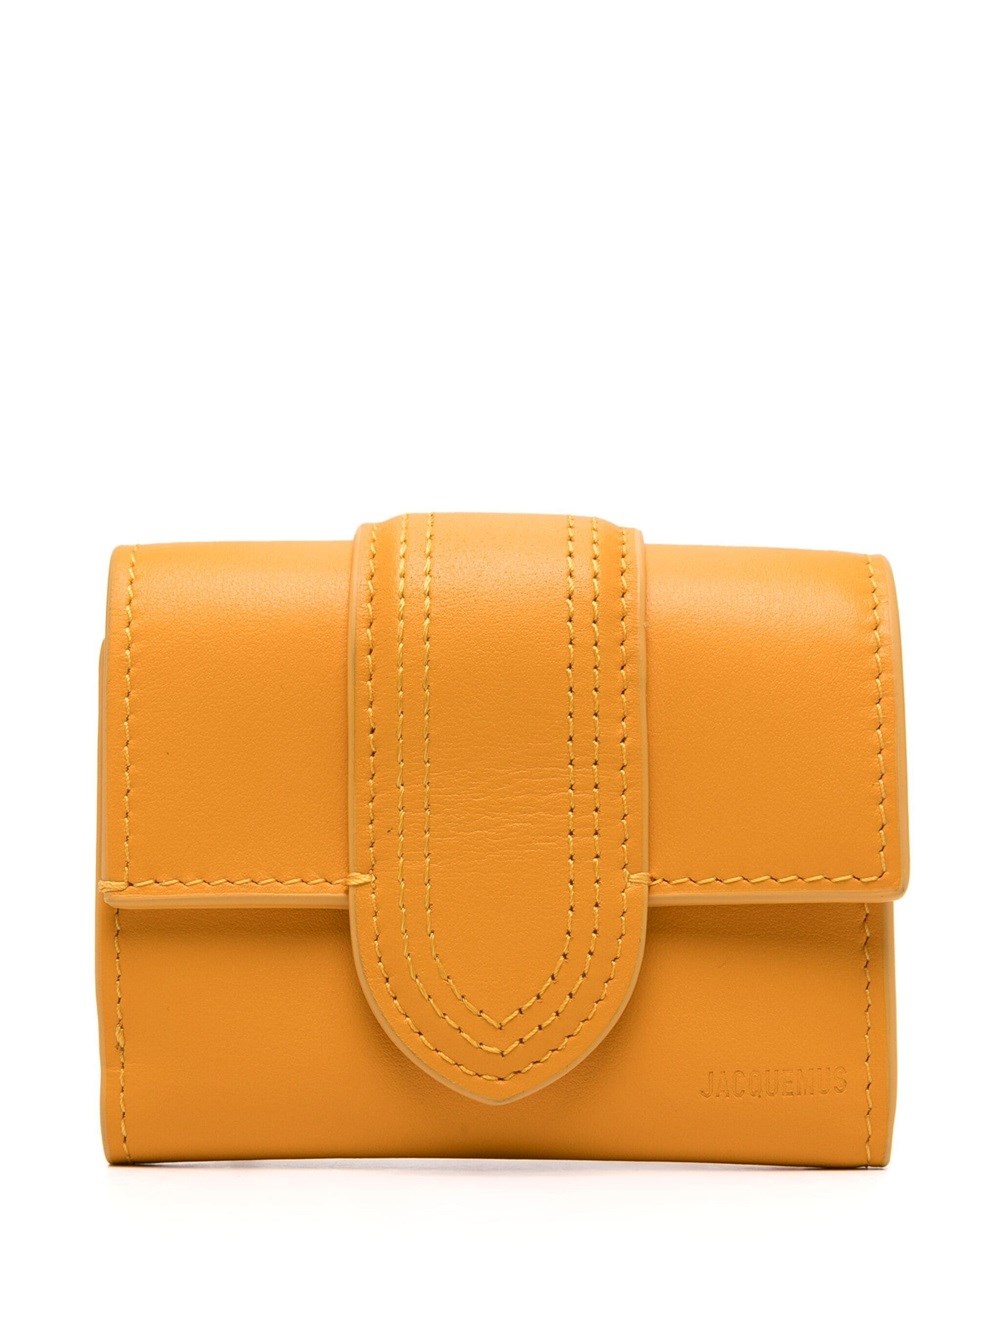 Jacquemus Le Compact Child Wallet In Yellow & Orange